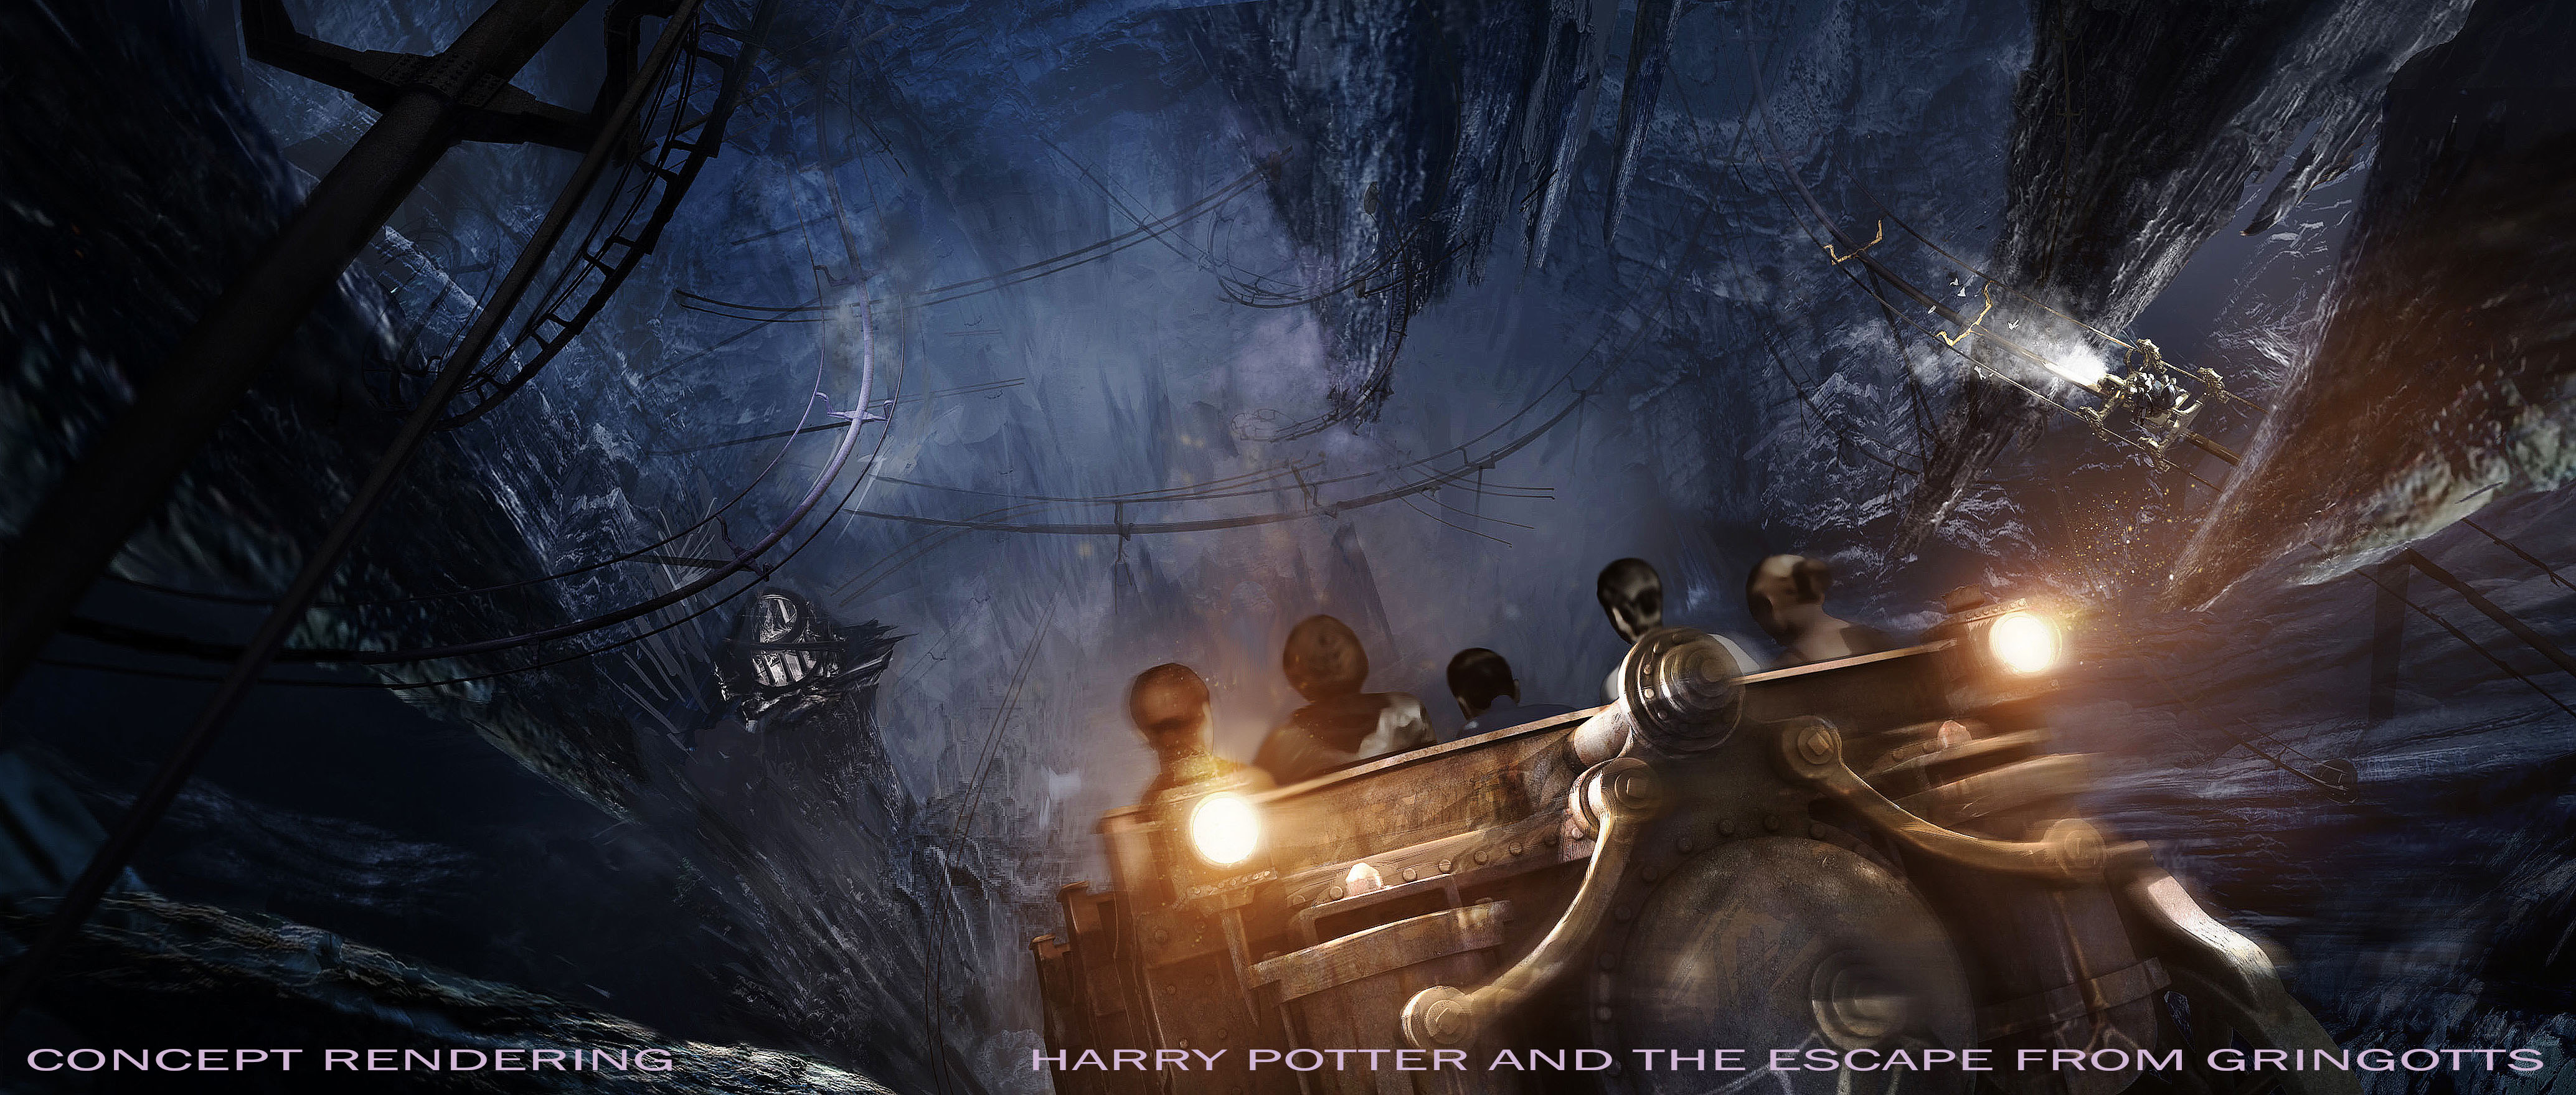 HP and the Escape from Gringotts